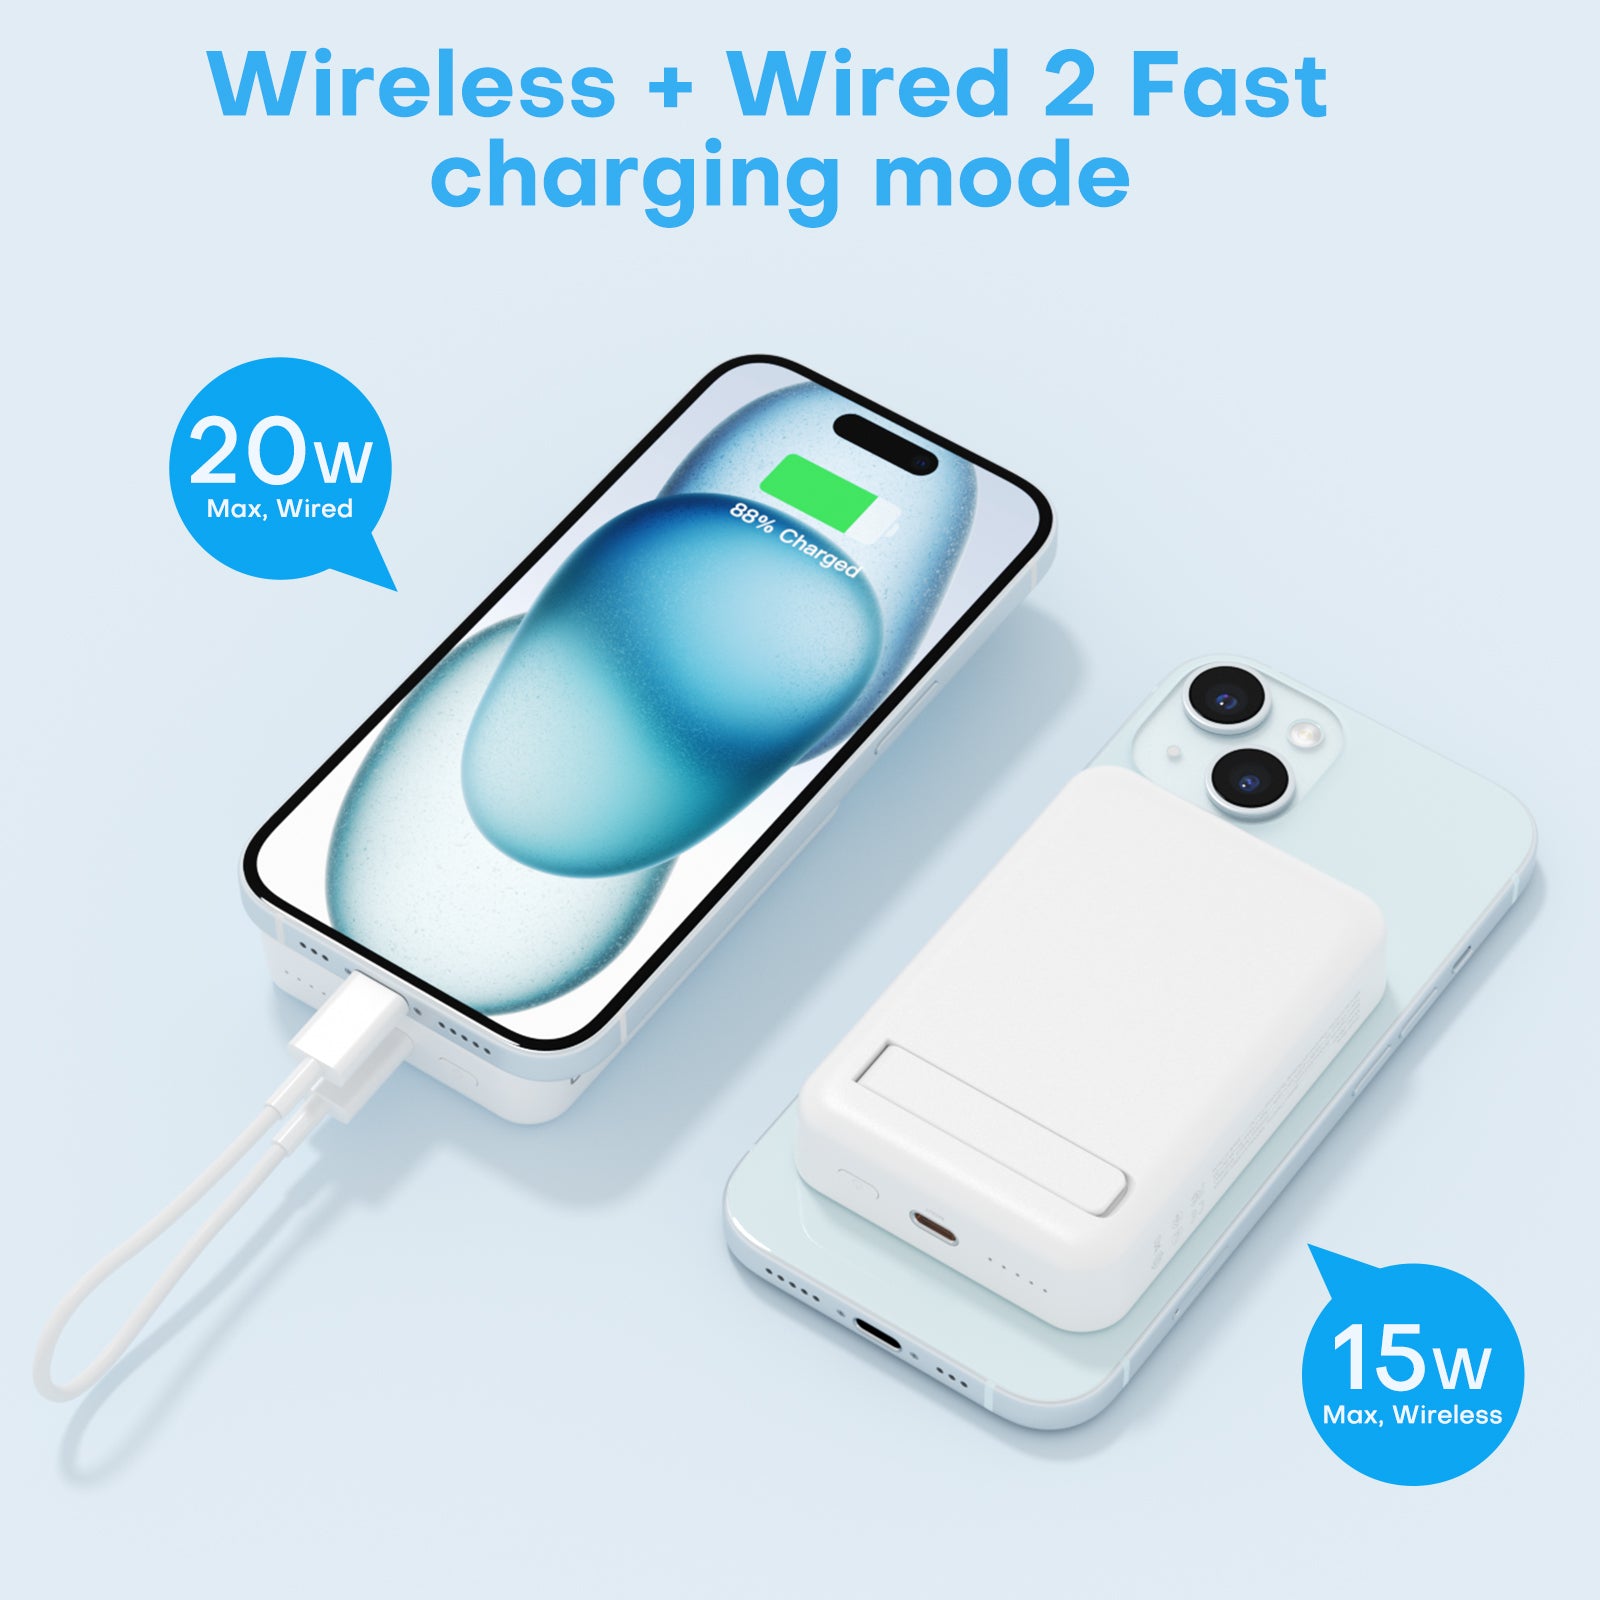 OMOTON Wireless Portable Charger Power Bank